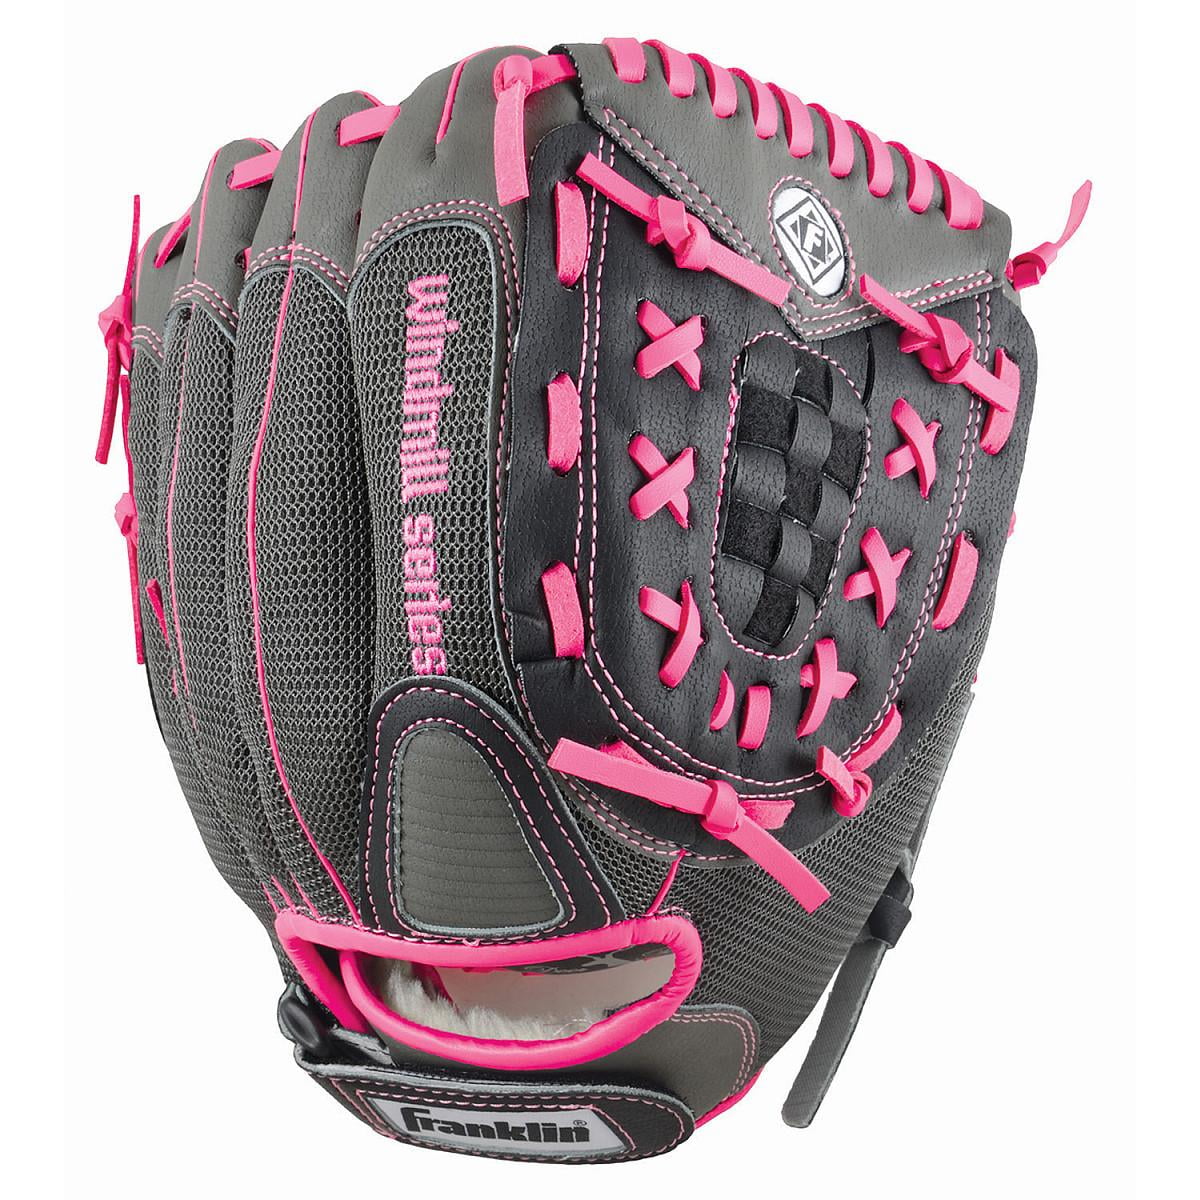 Rawlings Sure Catch Series 12 Inch Scsb12pu Youth Fastpitch Softball Glove for sale online 